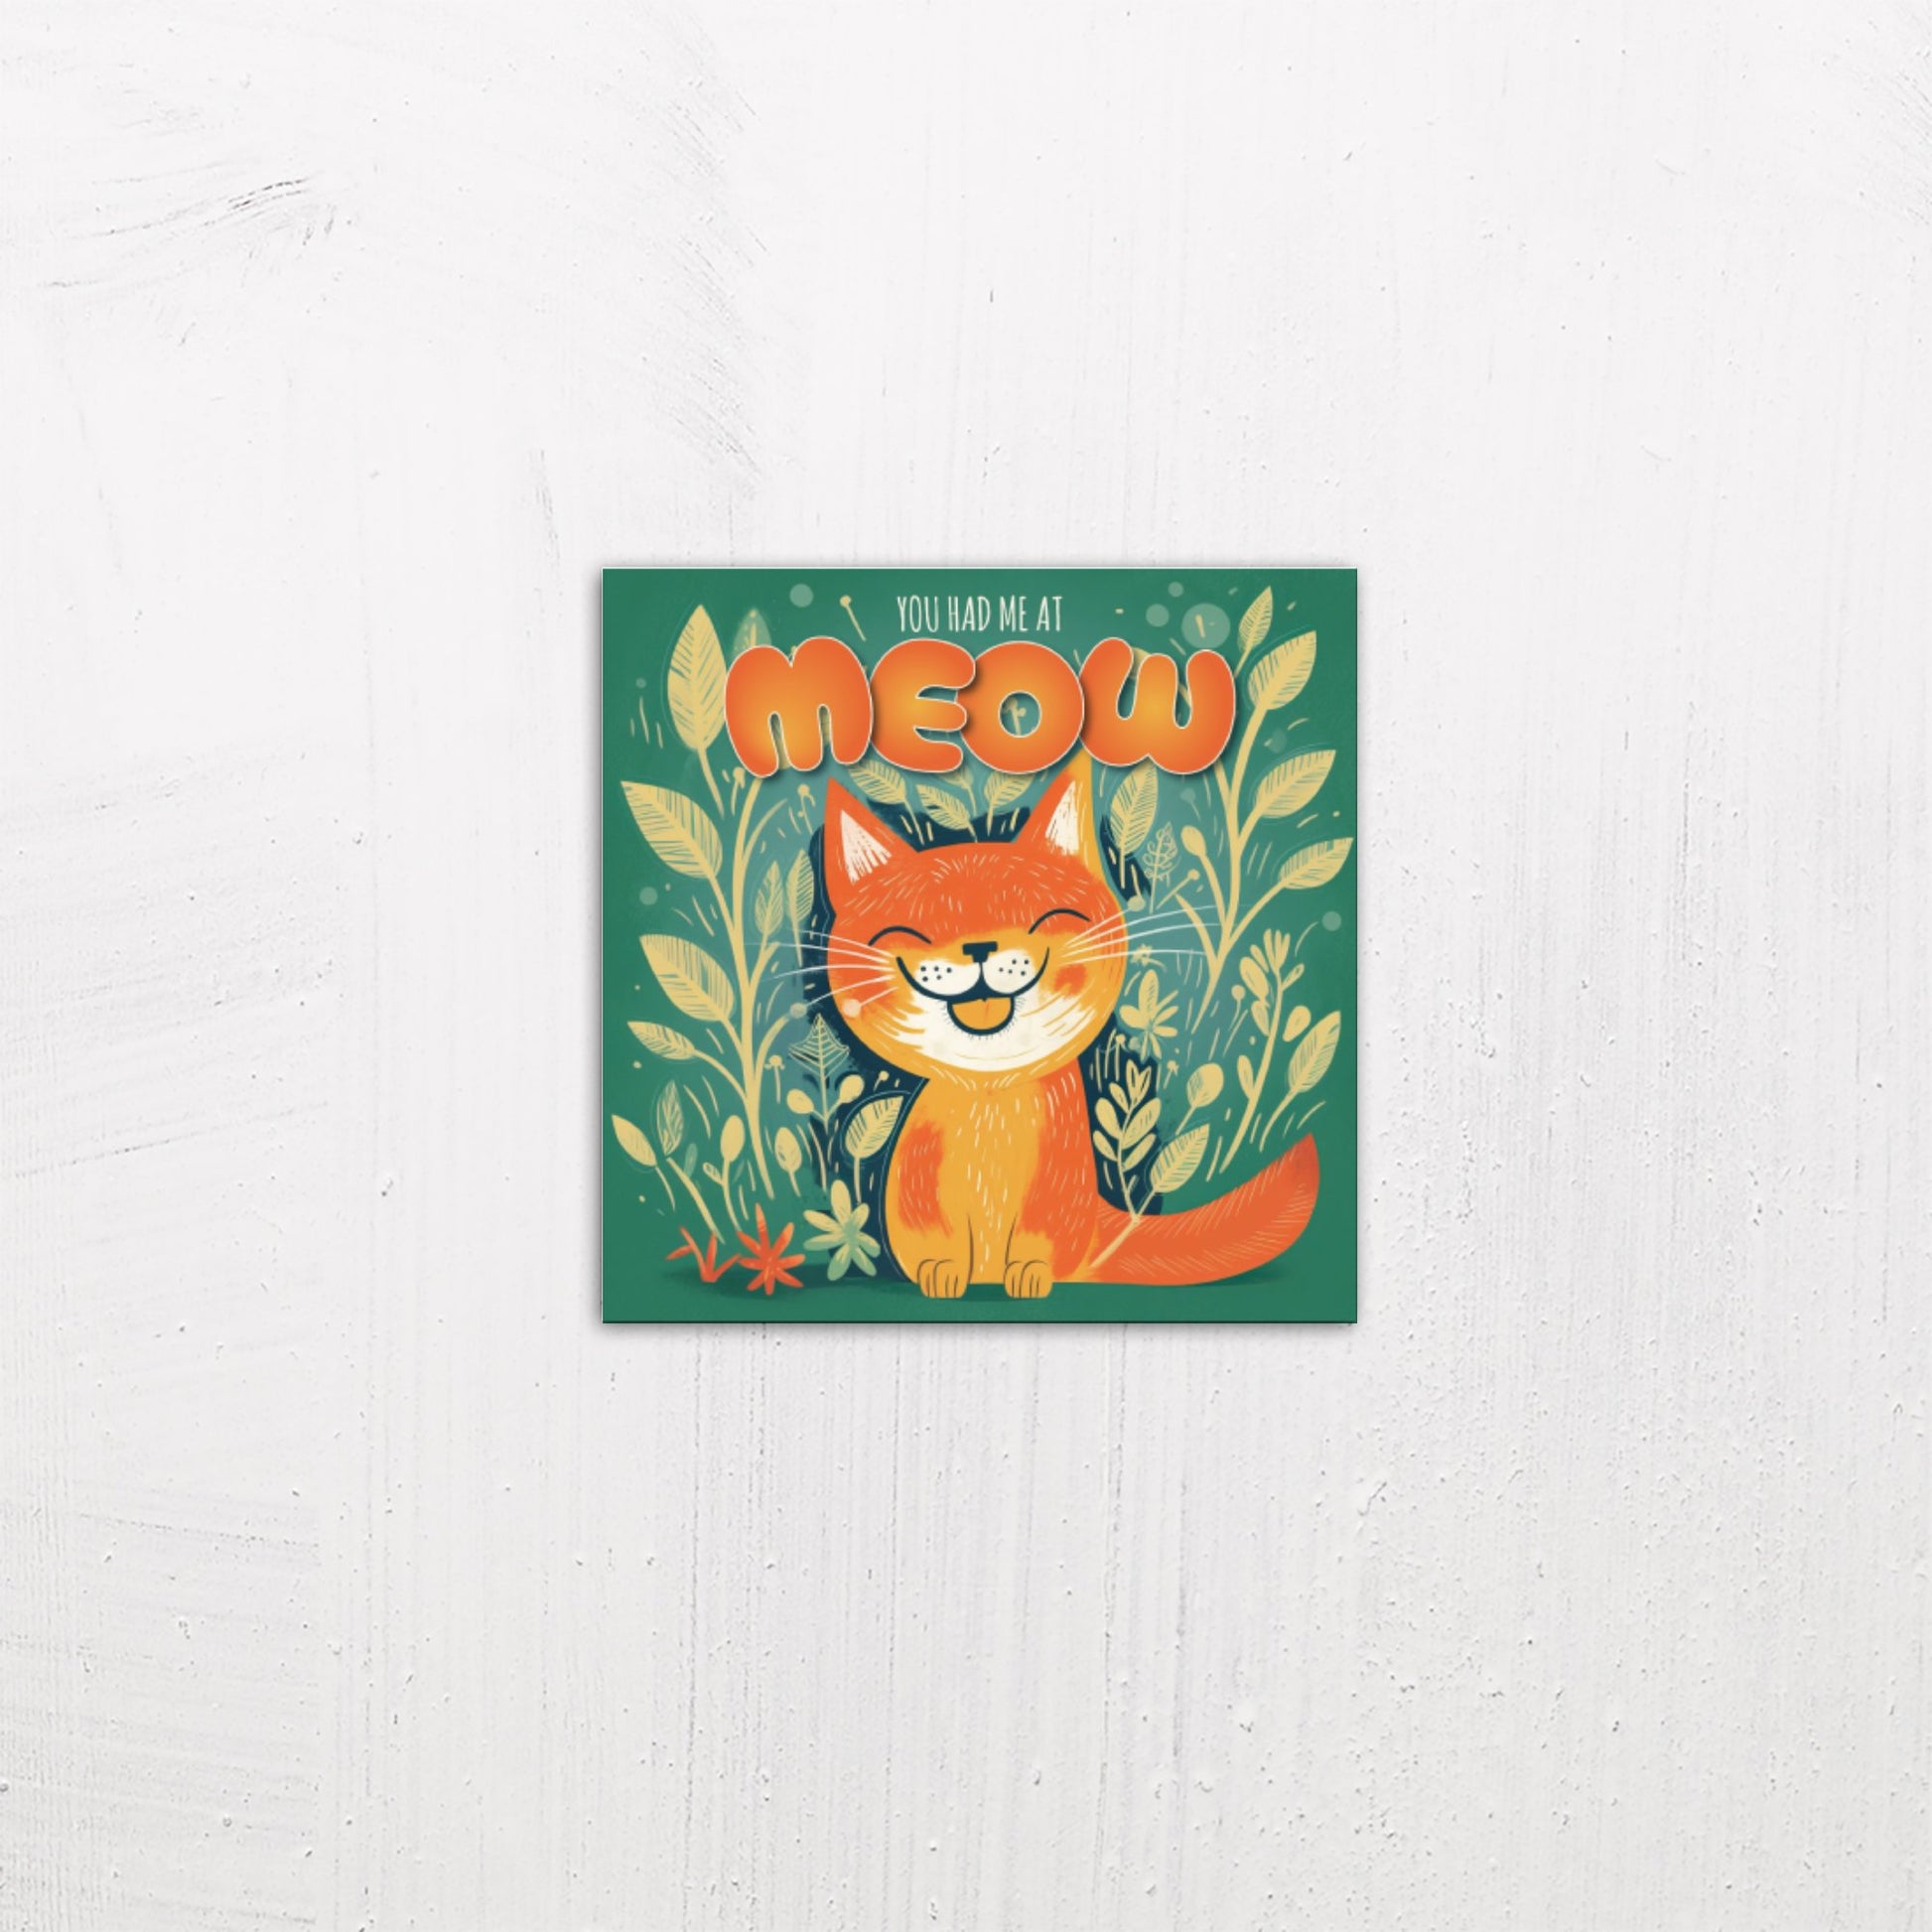 A small size metal art poster display plate with printed design of a You Had Me At Meow - Cute Cat Quote